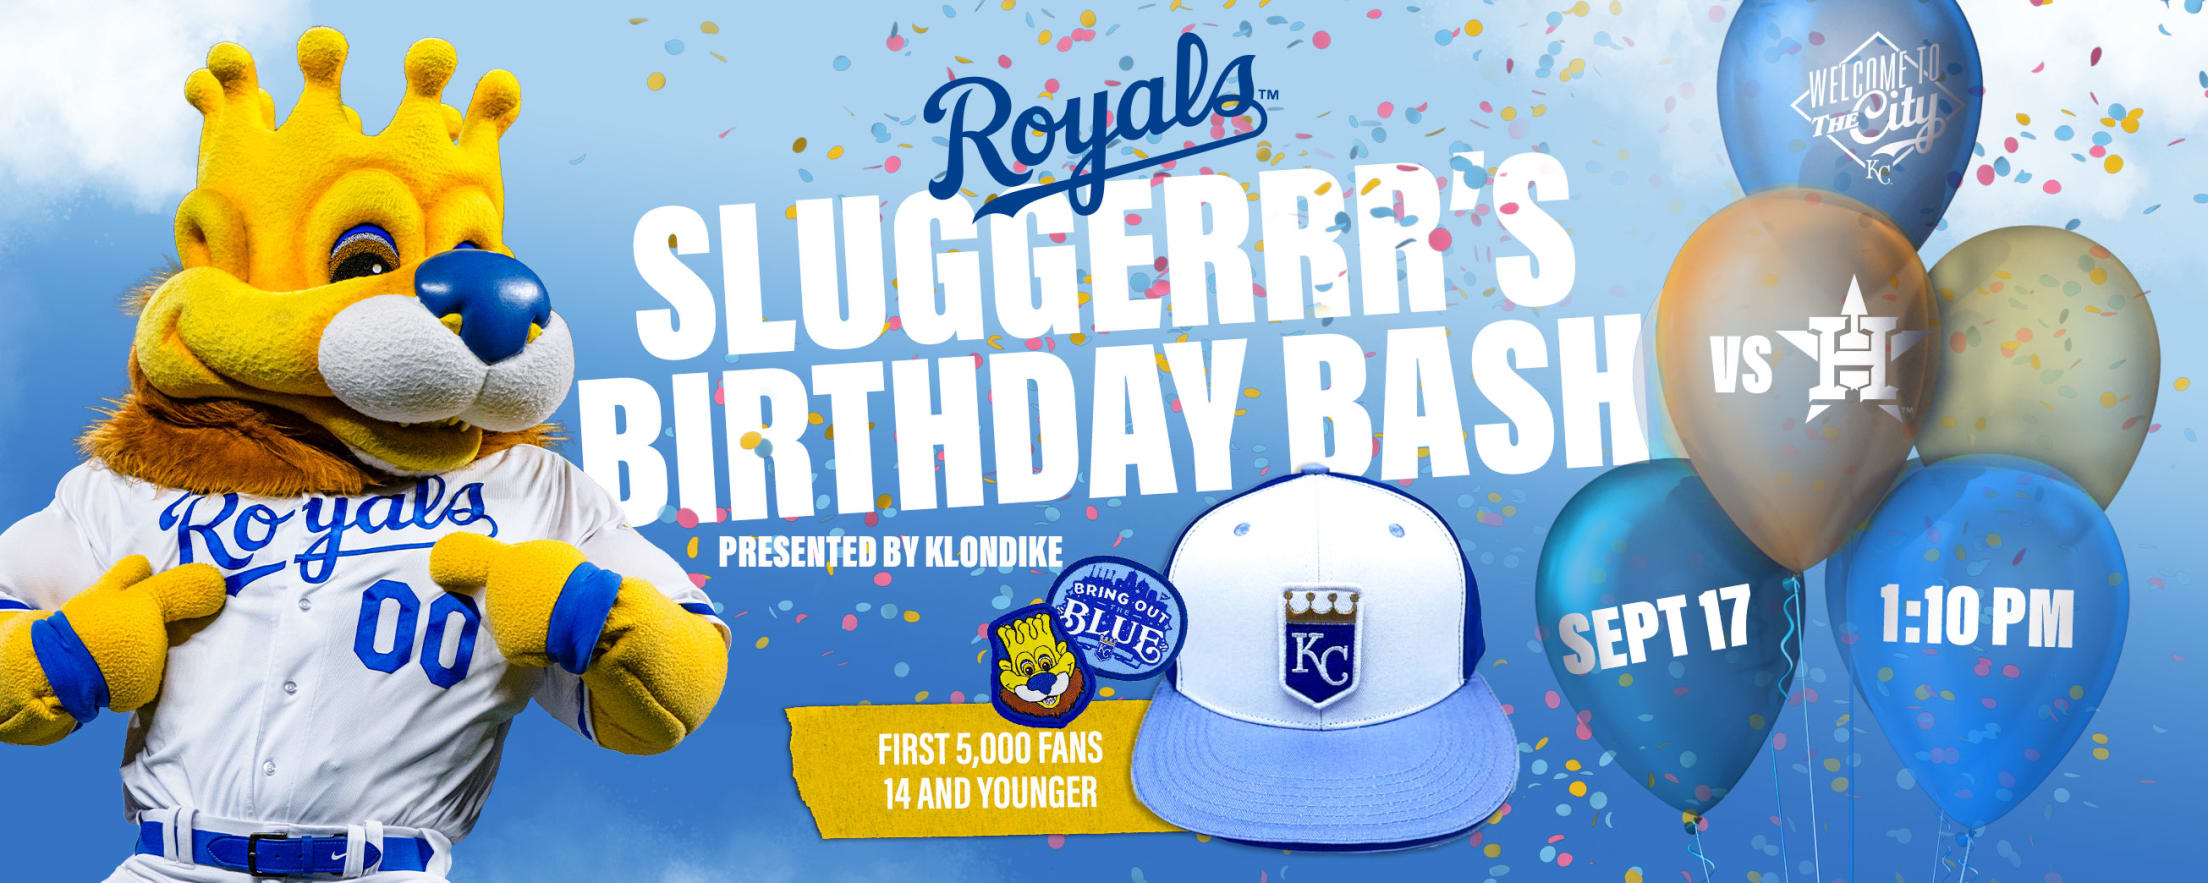 An investigation of Sluggerrr's birthday party - Royals Review